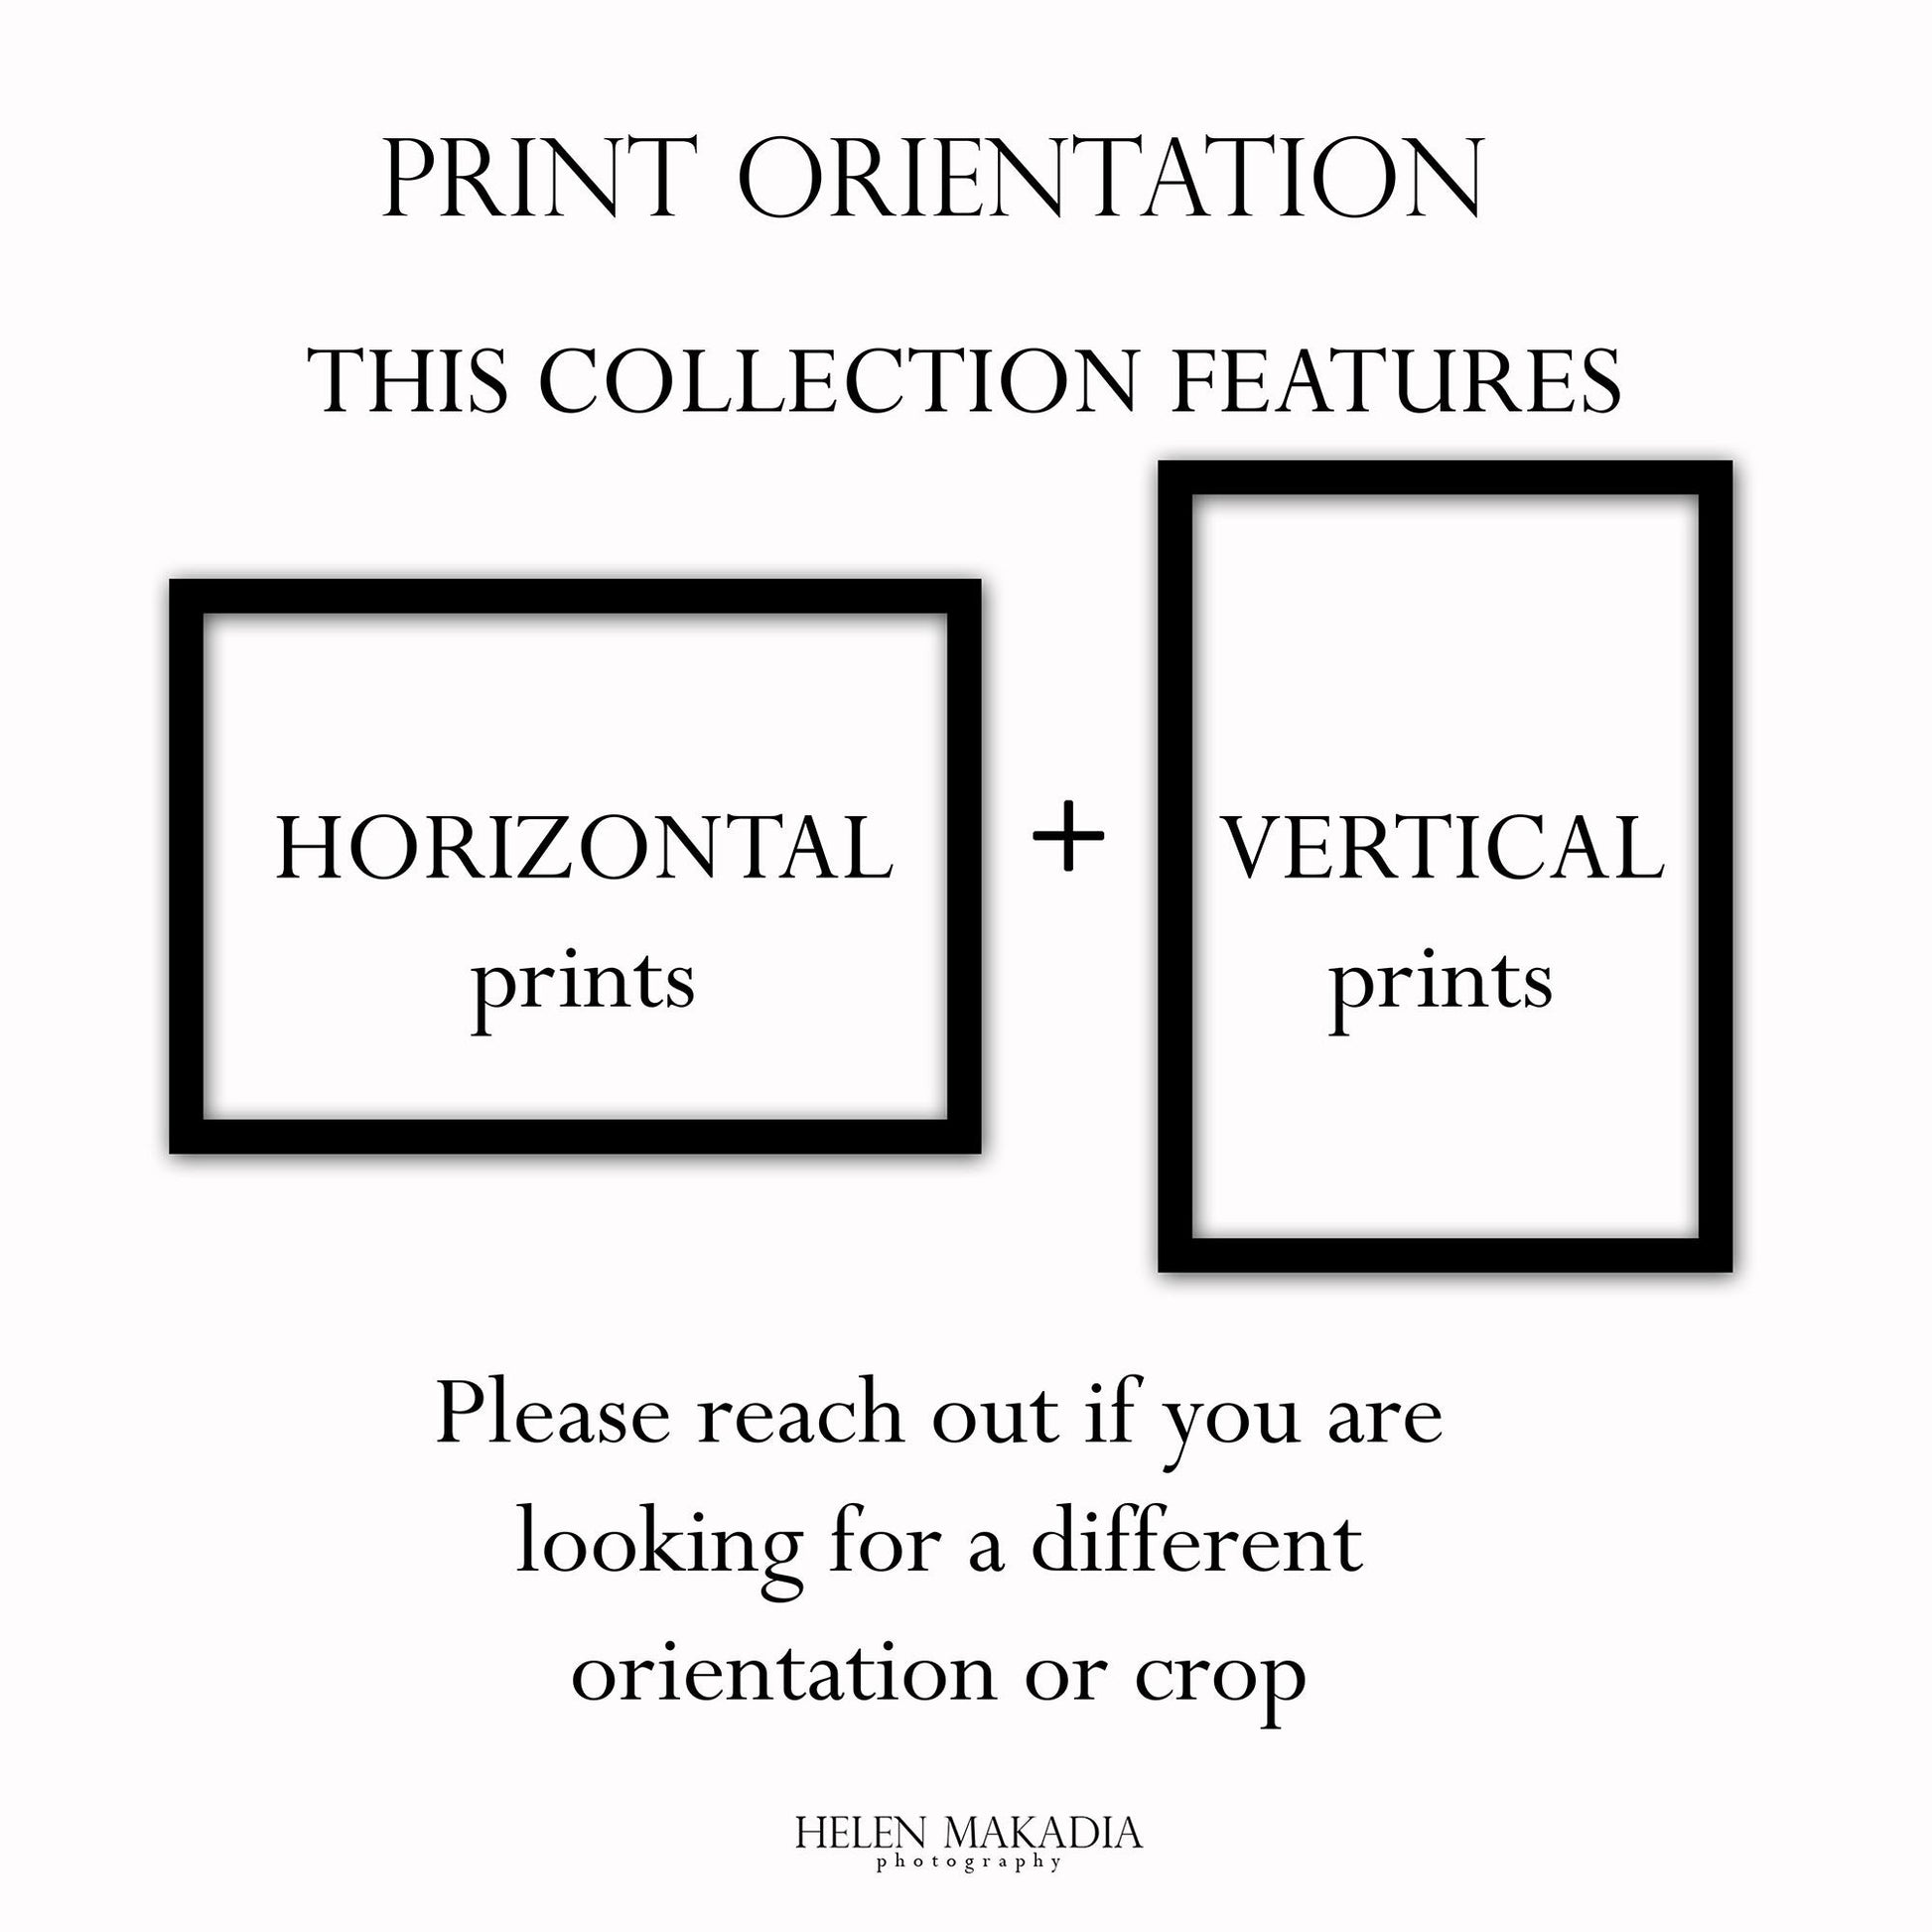 This collection has horizontal and vertical images